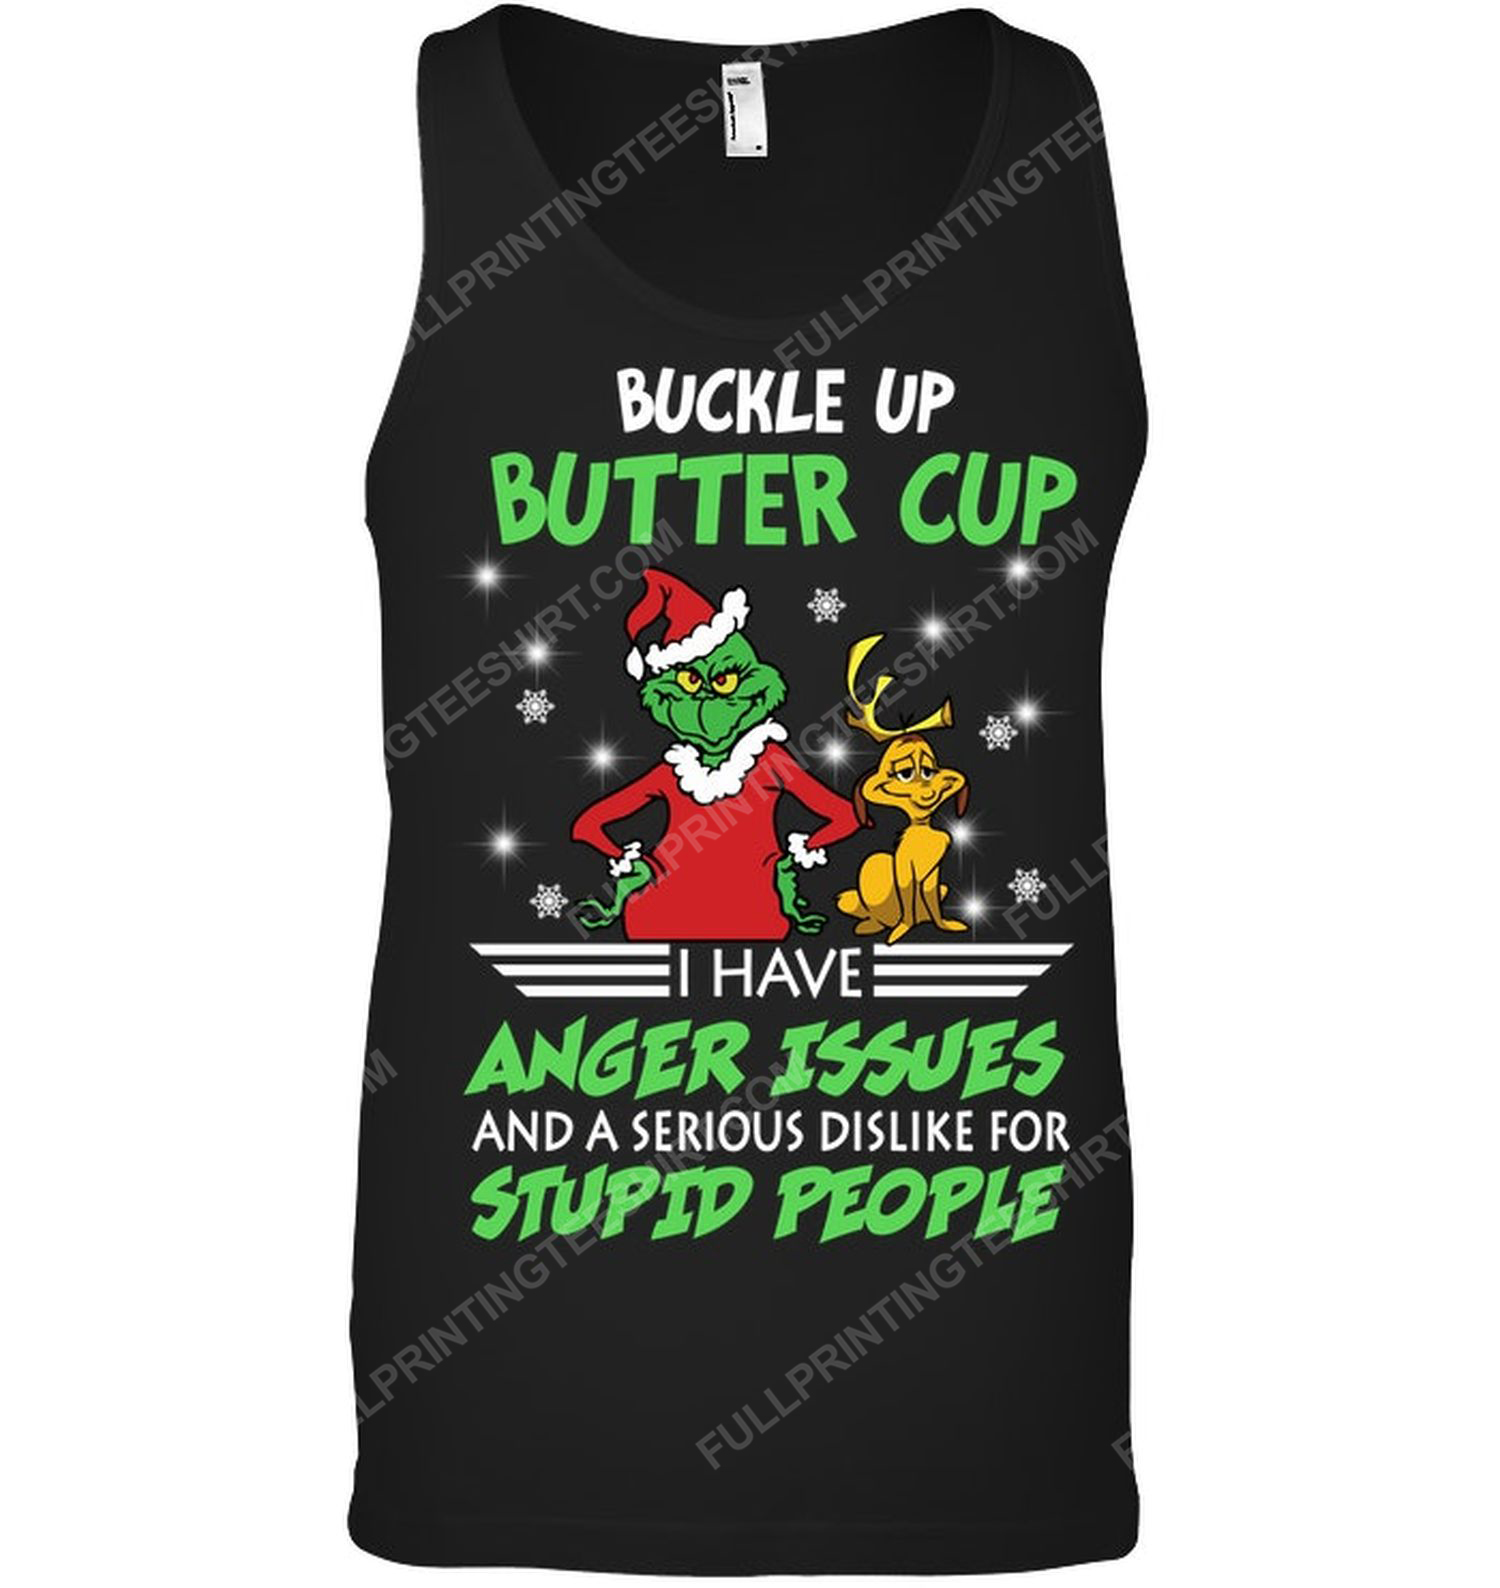 The grinch buckle the grinch up buttercup i have anger issues and a serious dislike for stupid people tank top